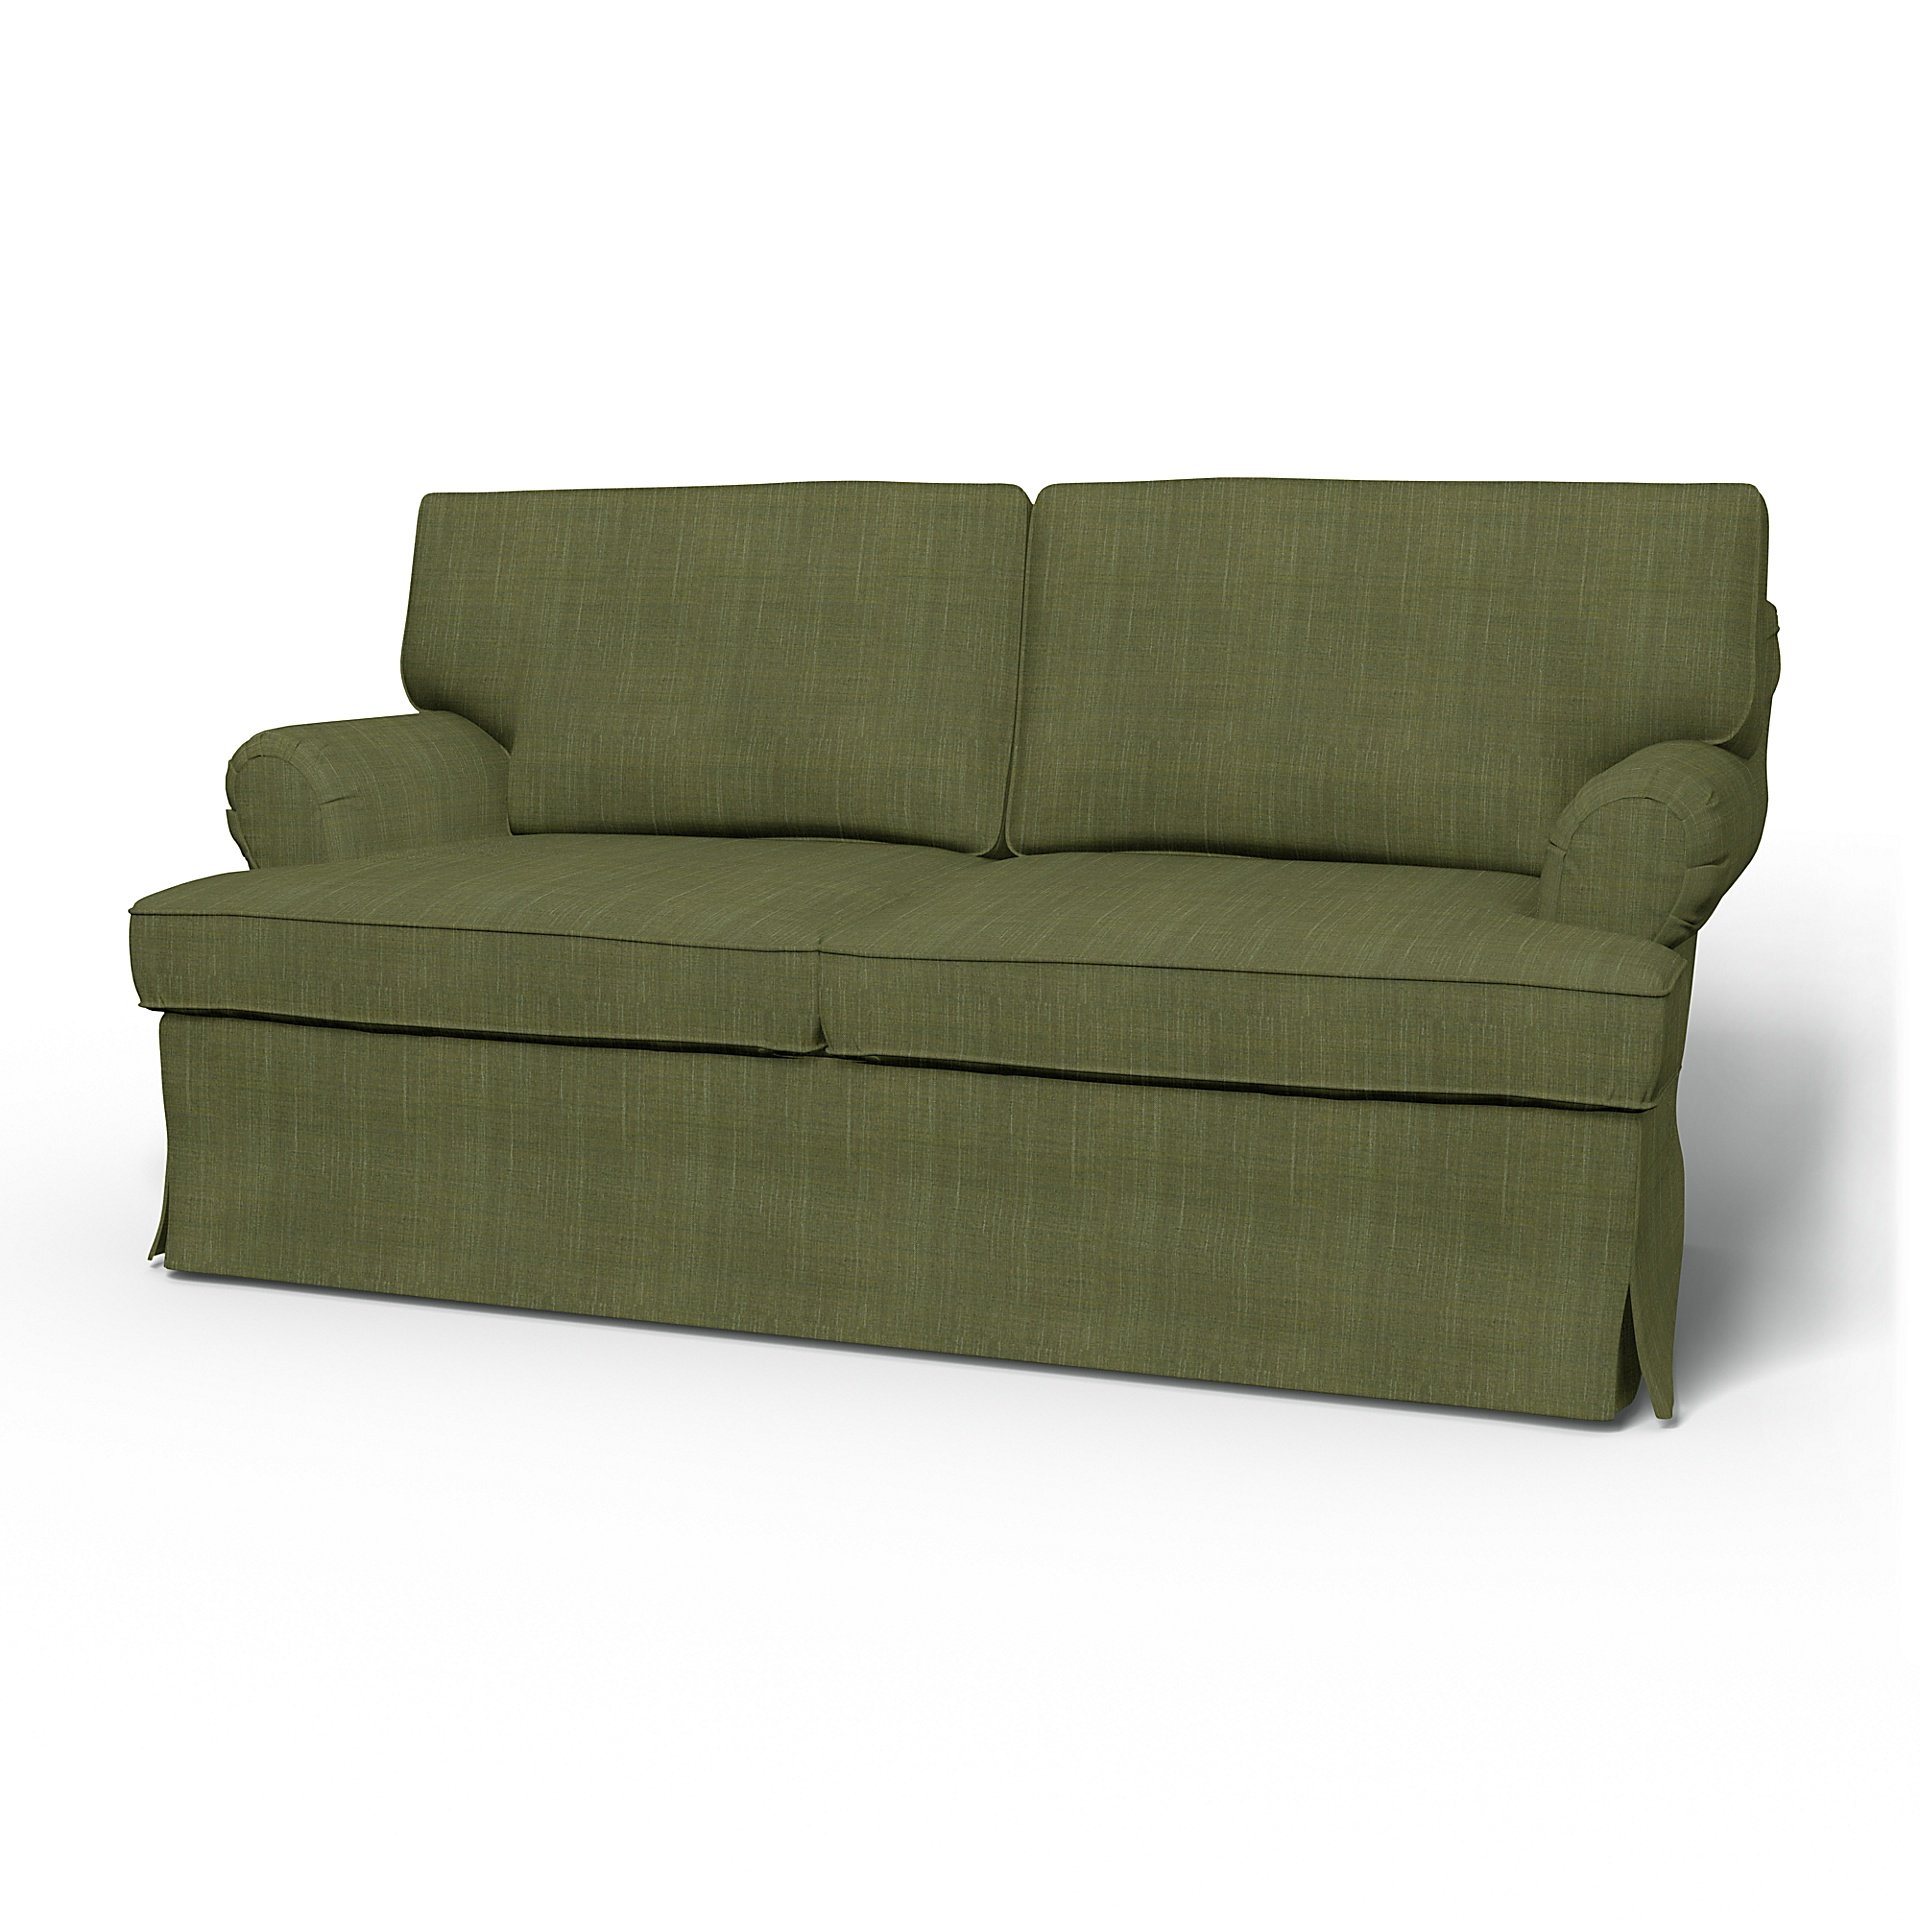 IKEA - Stockholm 2 Seater Sofa Cover (1994-2000), Moss Green, Boucle & Texture - Bemz